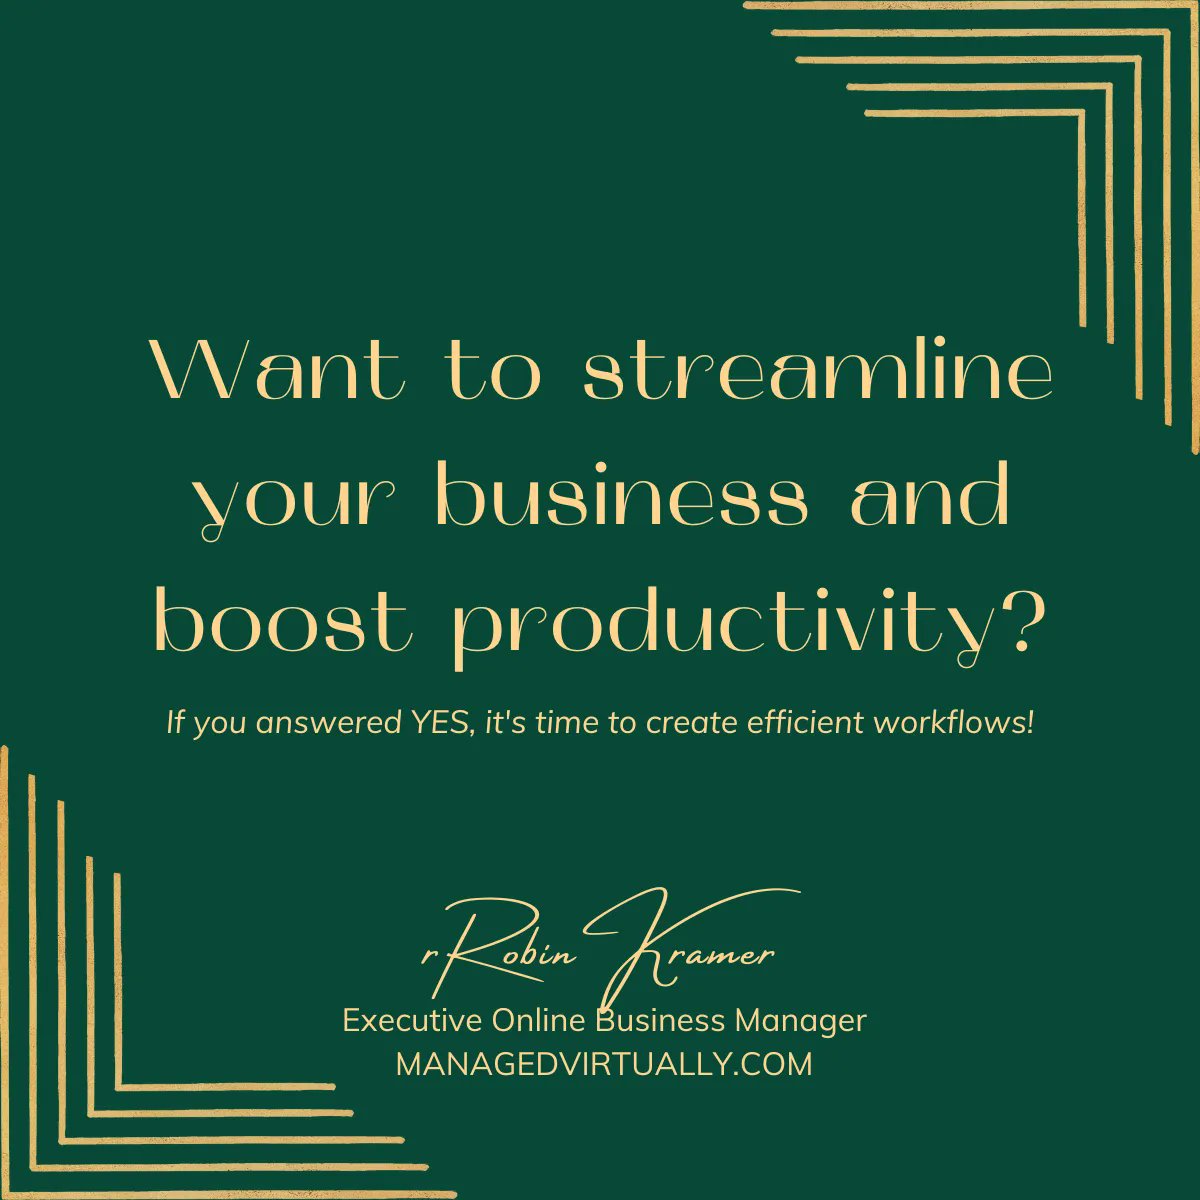 'Attention online entrepreneurs!  By mapping out your processes, you can identify bottlenecks, eliminate unnecessary steps, and free up more time to focus on growing your business. 

 #ProductivityHacks #EfficientWorkflows #OnlineEntrepreneurs'